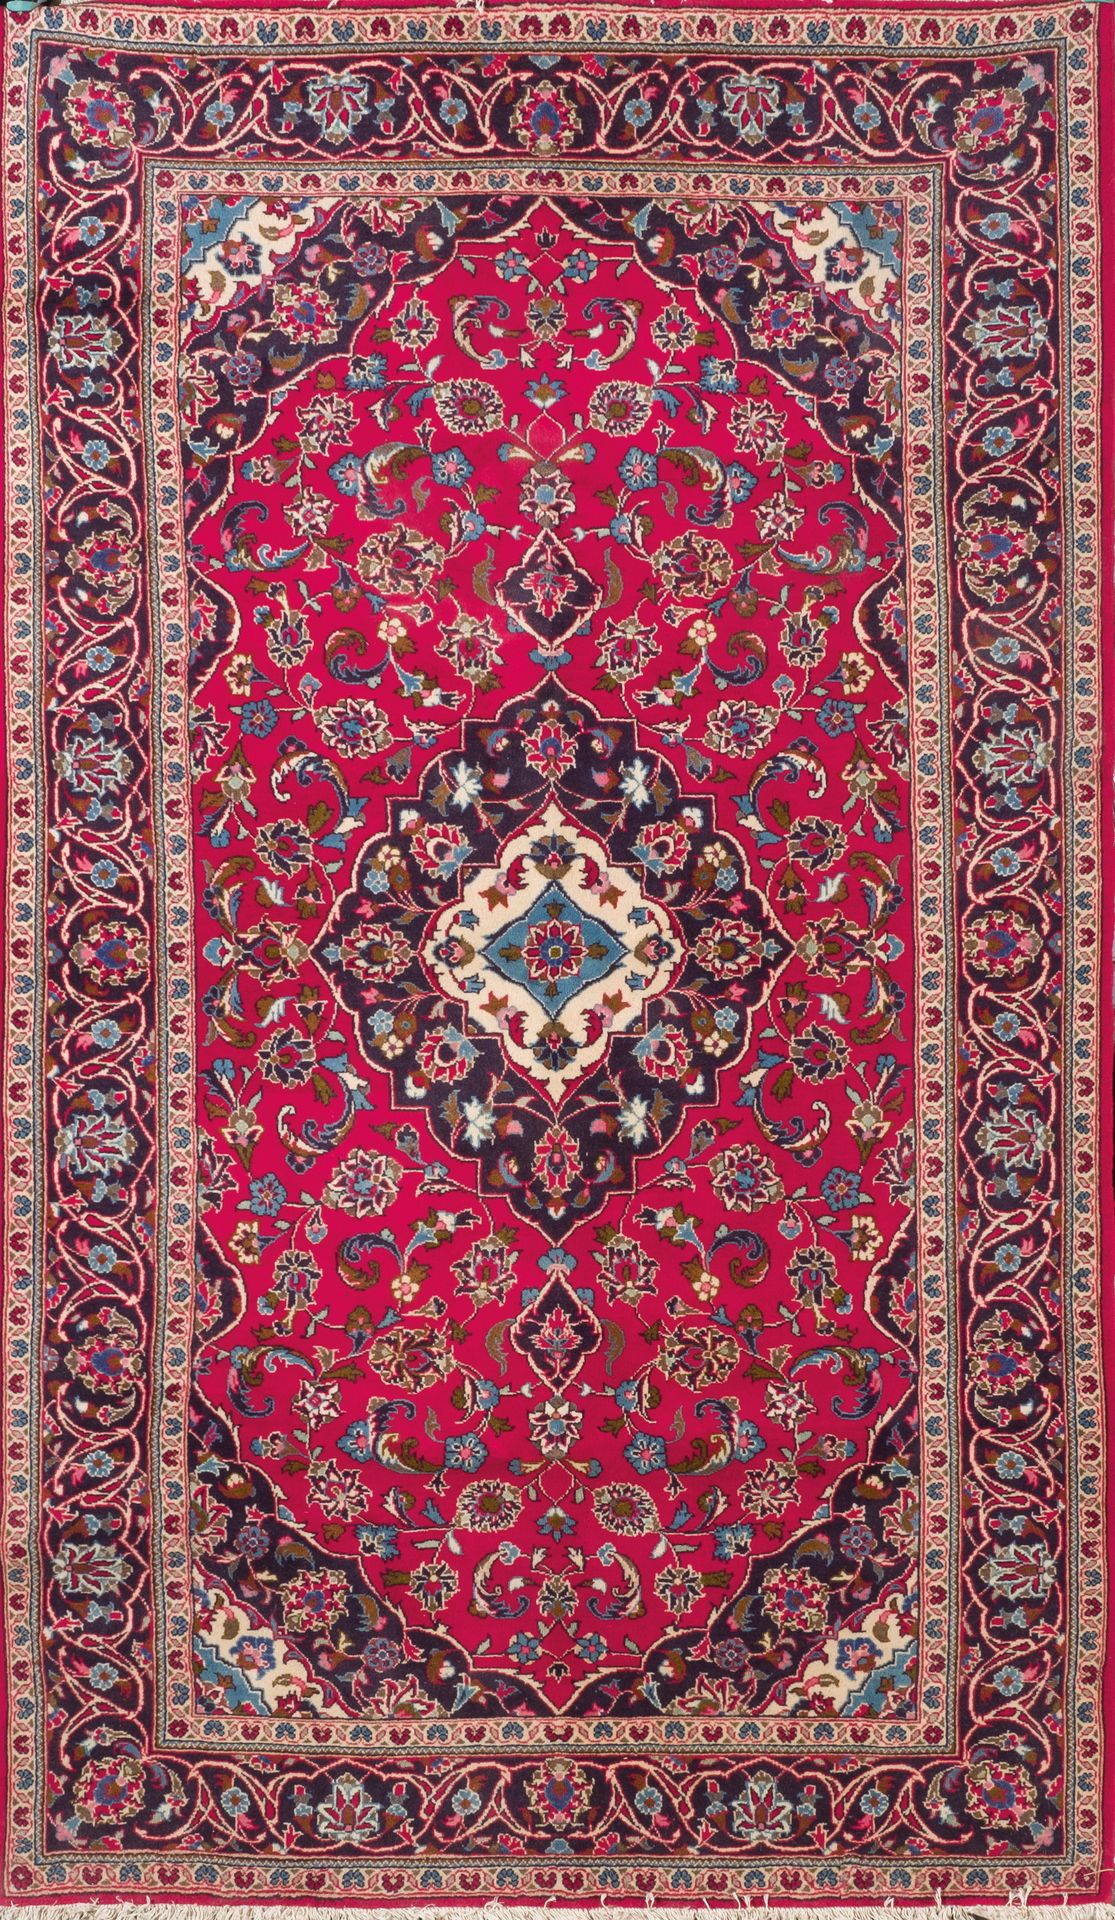 Null Iranian Kashan rug made of wool. Profuse vegetal and floral decoration inte&hellip;